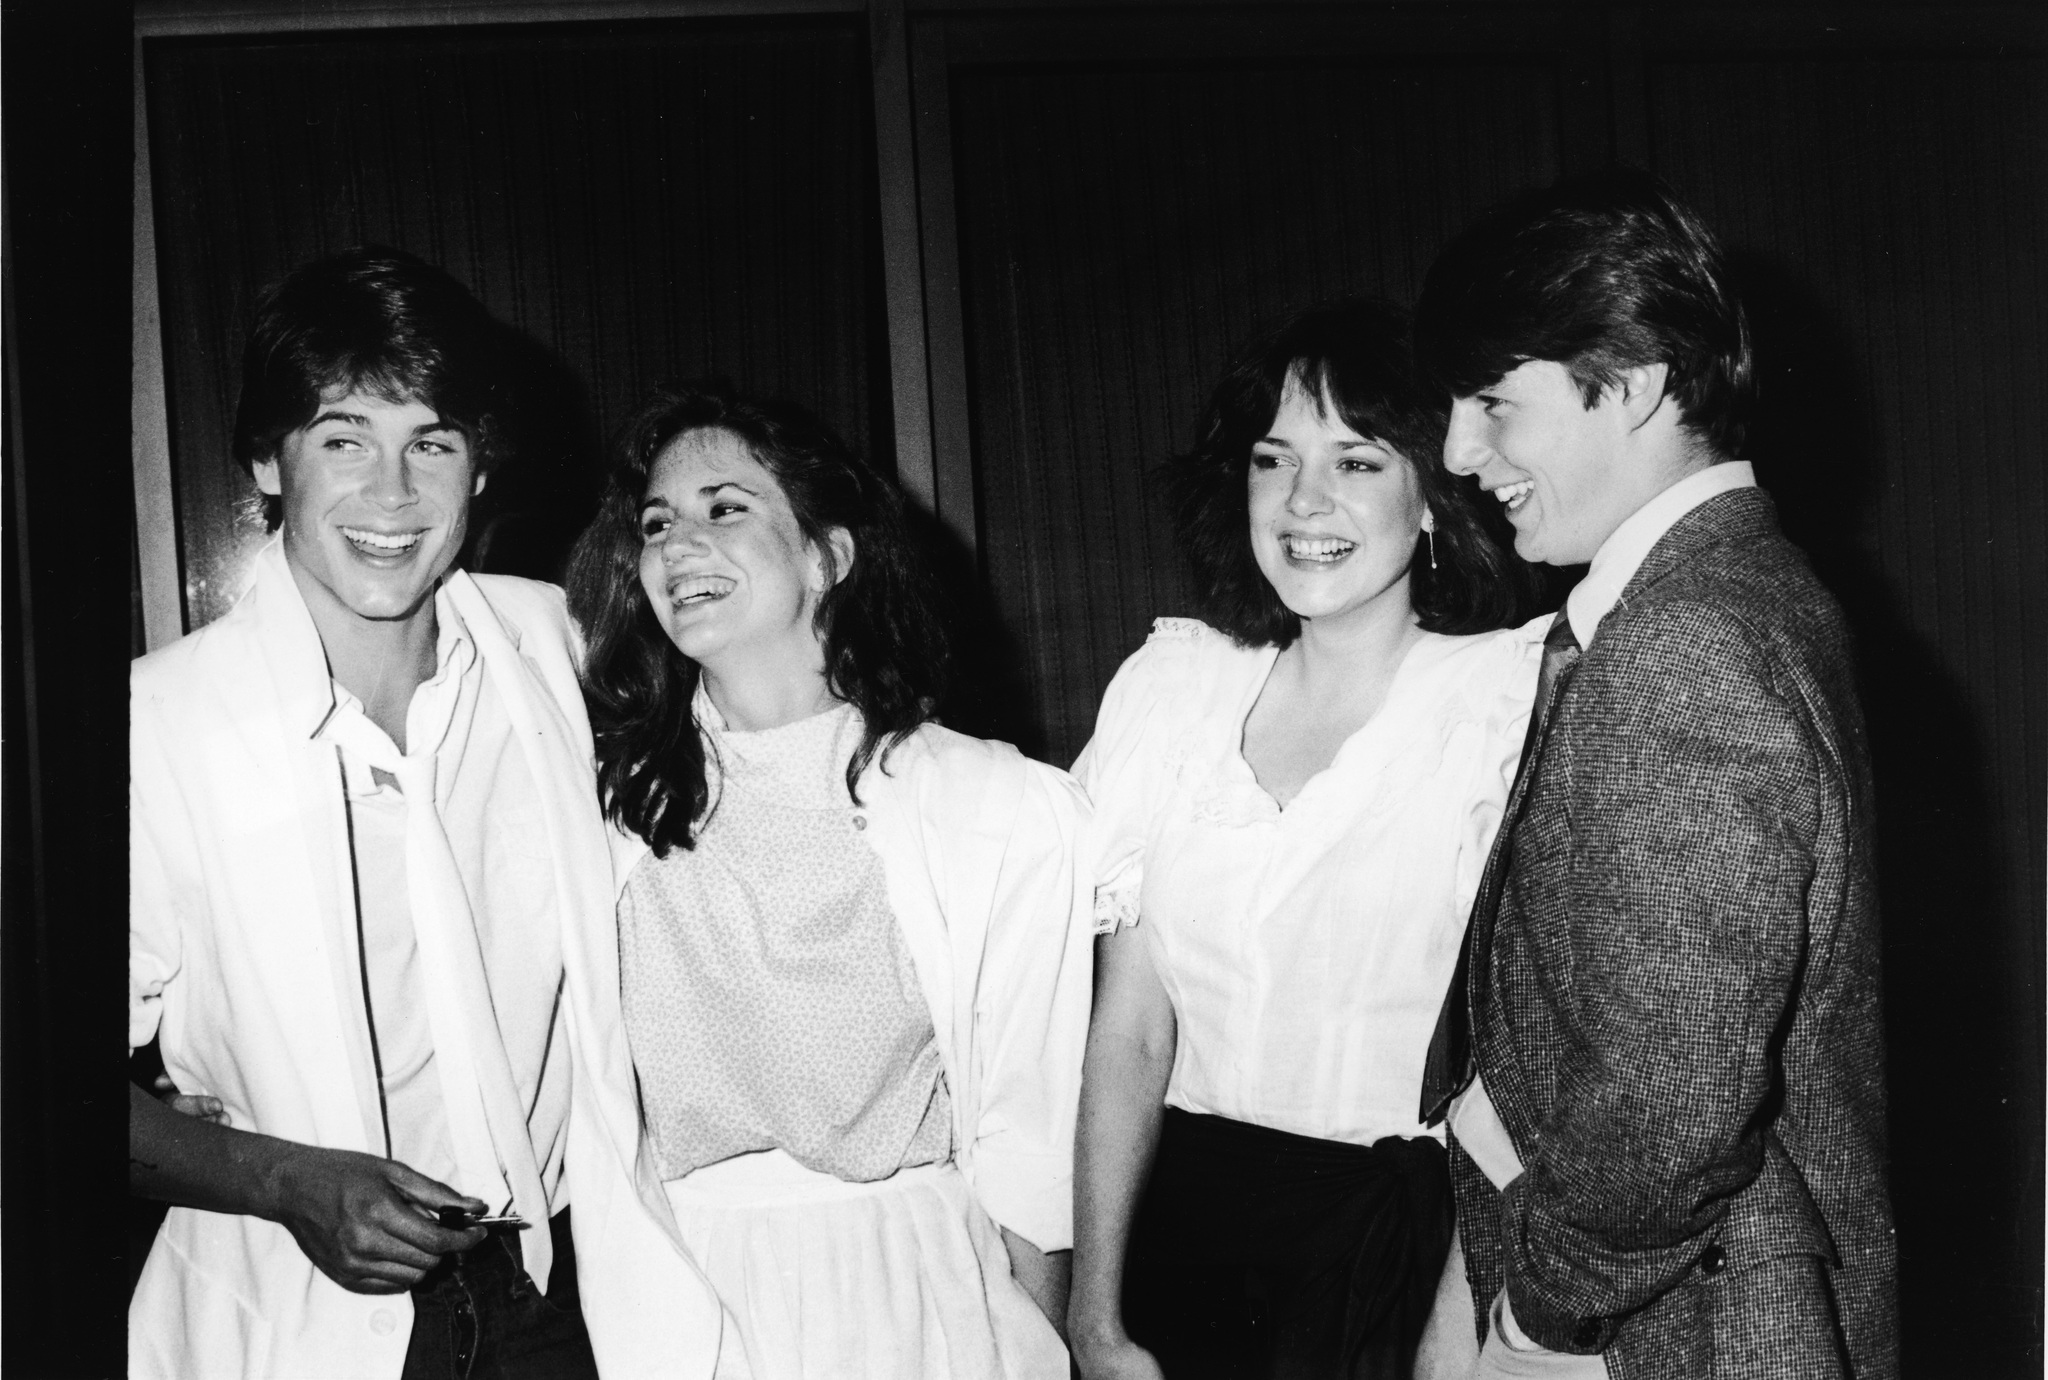 Tom Cruise, Rob Lowe, Melissa Gilbert and Michelle Meyrink